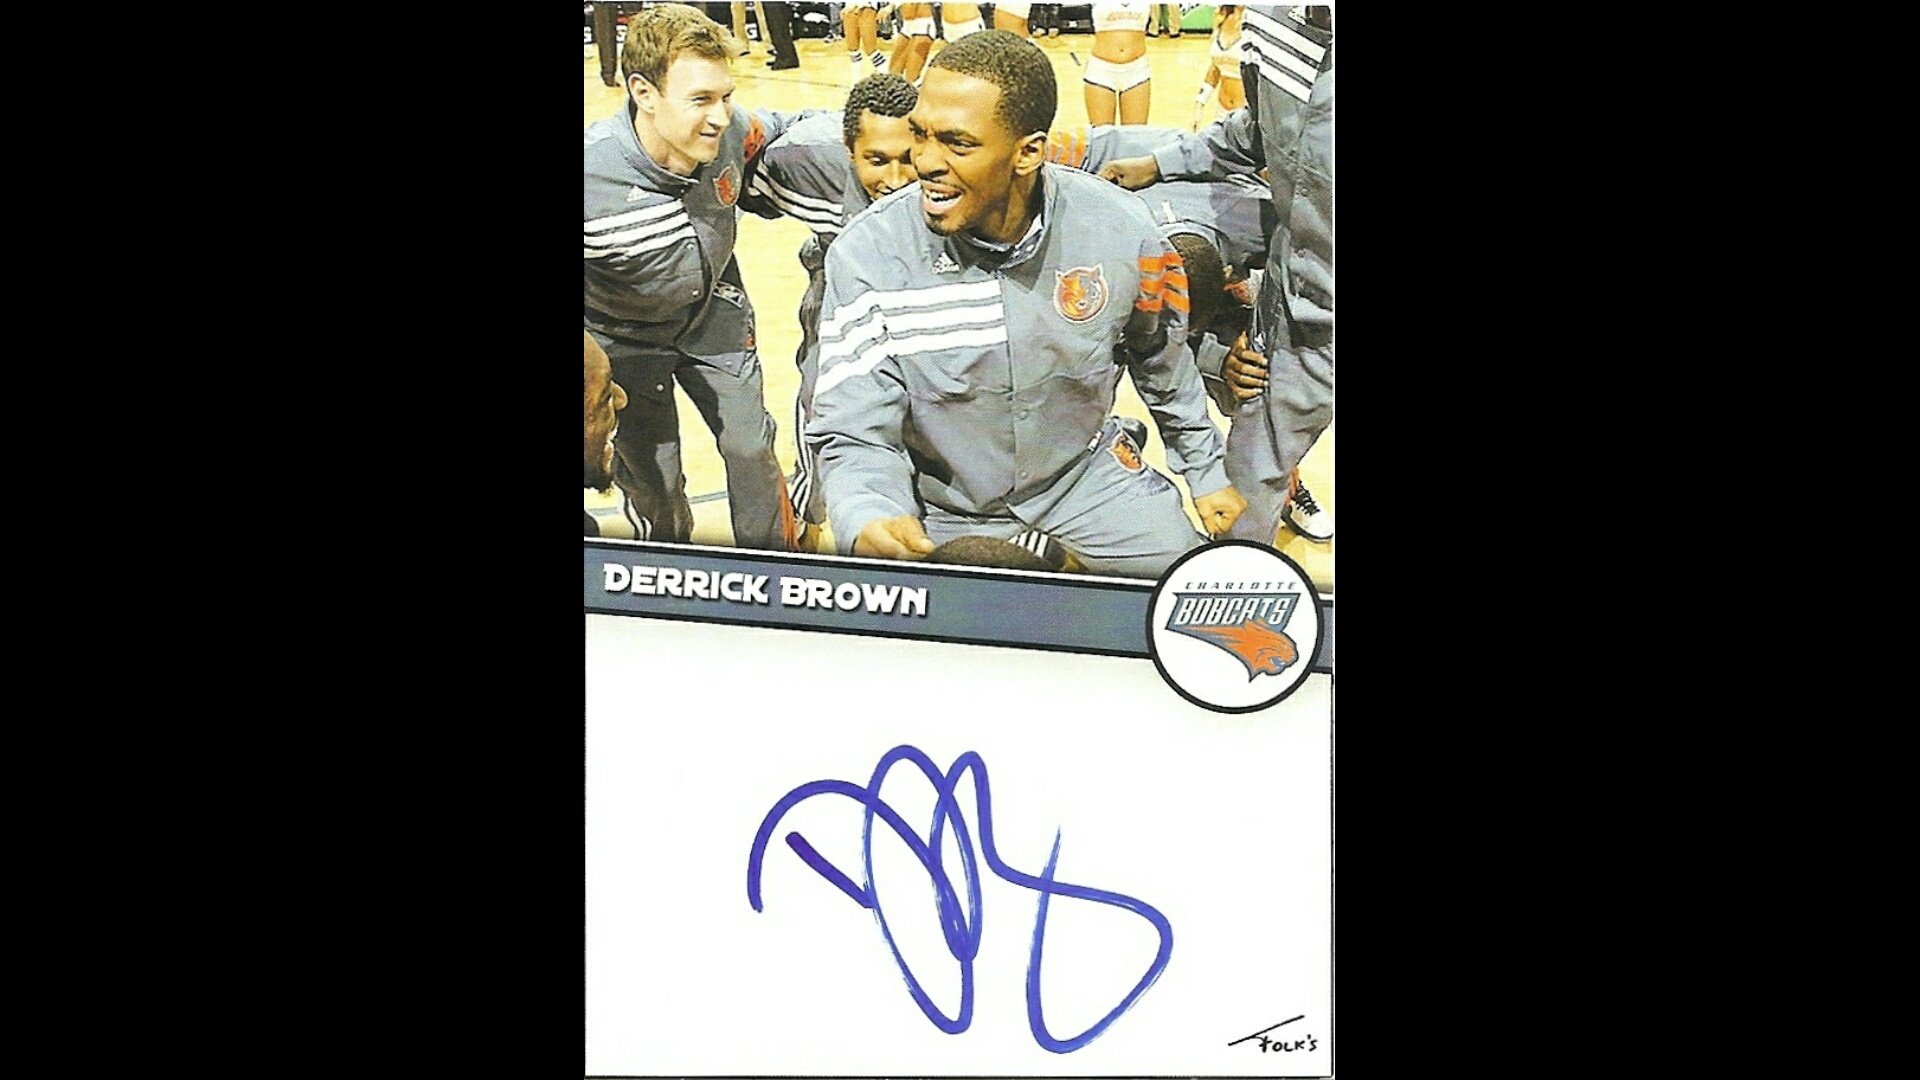 Happy Birthday to Derrick Brown of who turns 30 today. Enjoy your day 